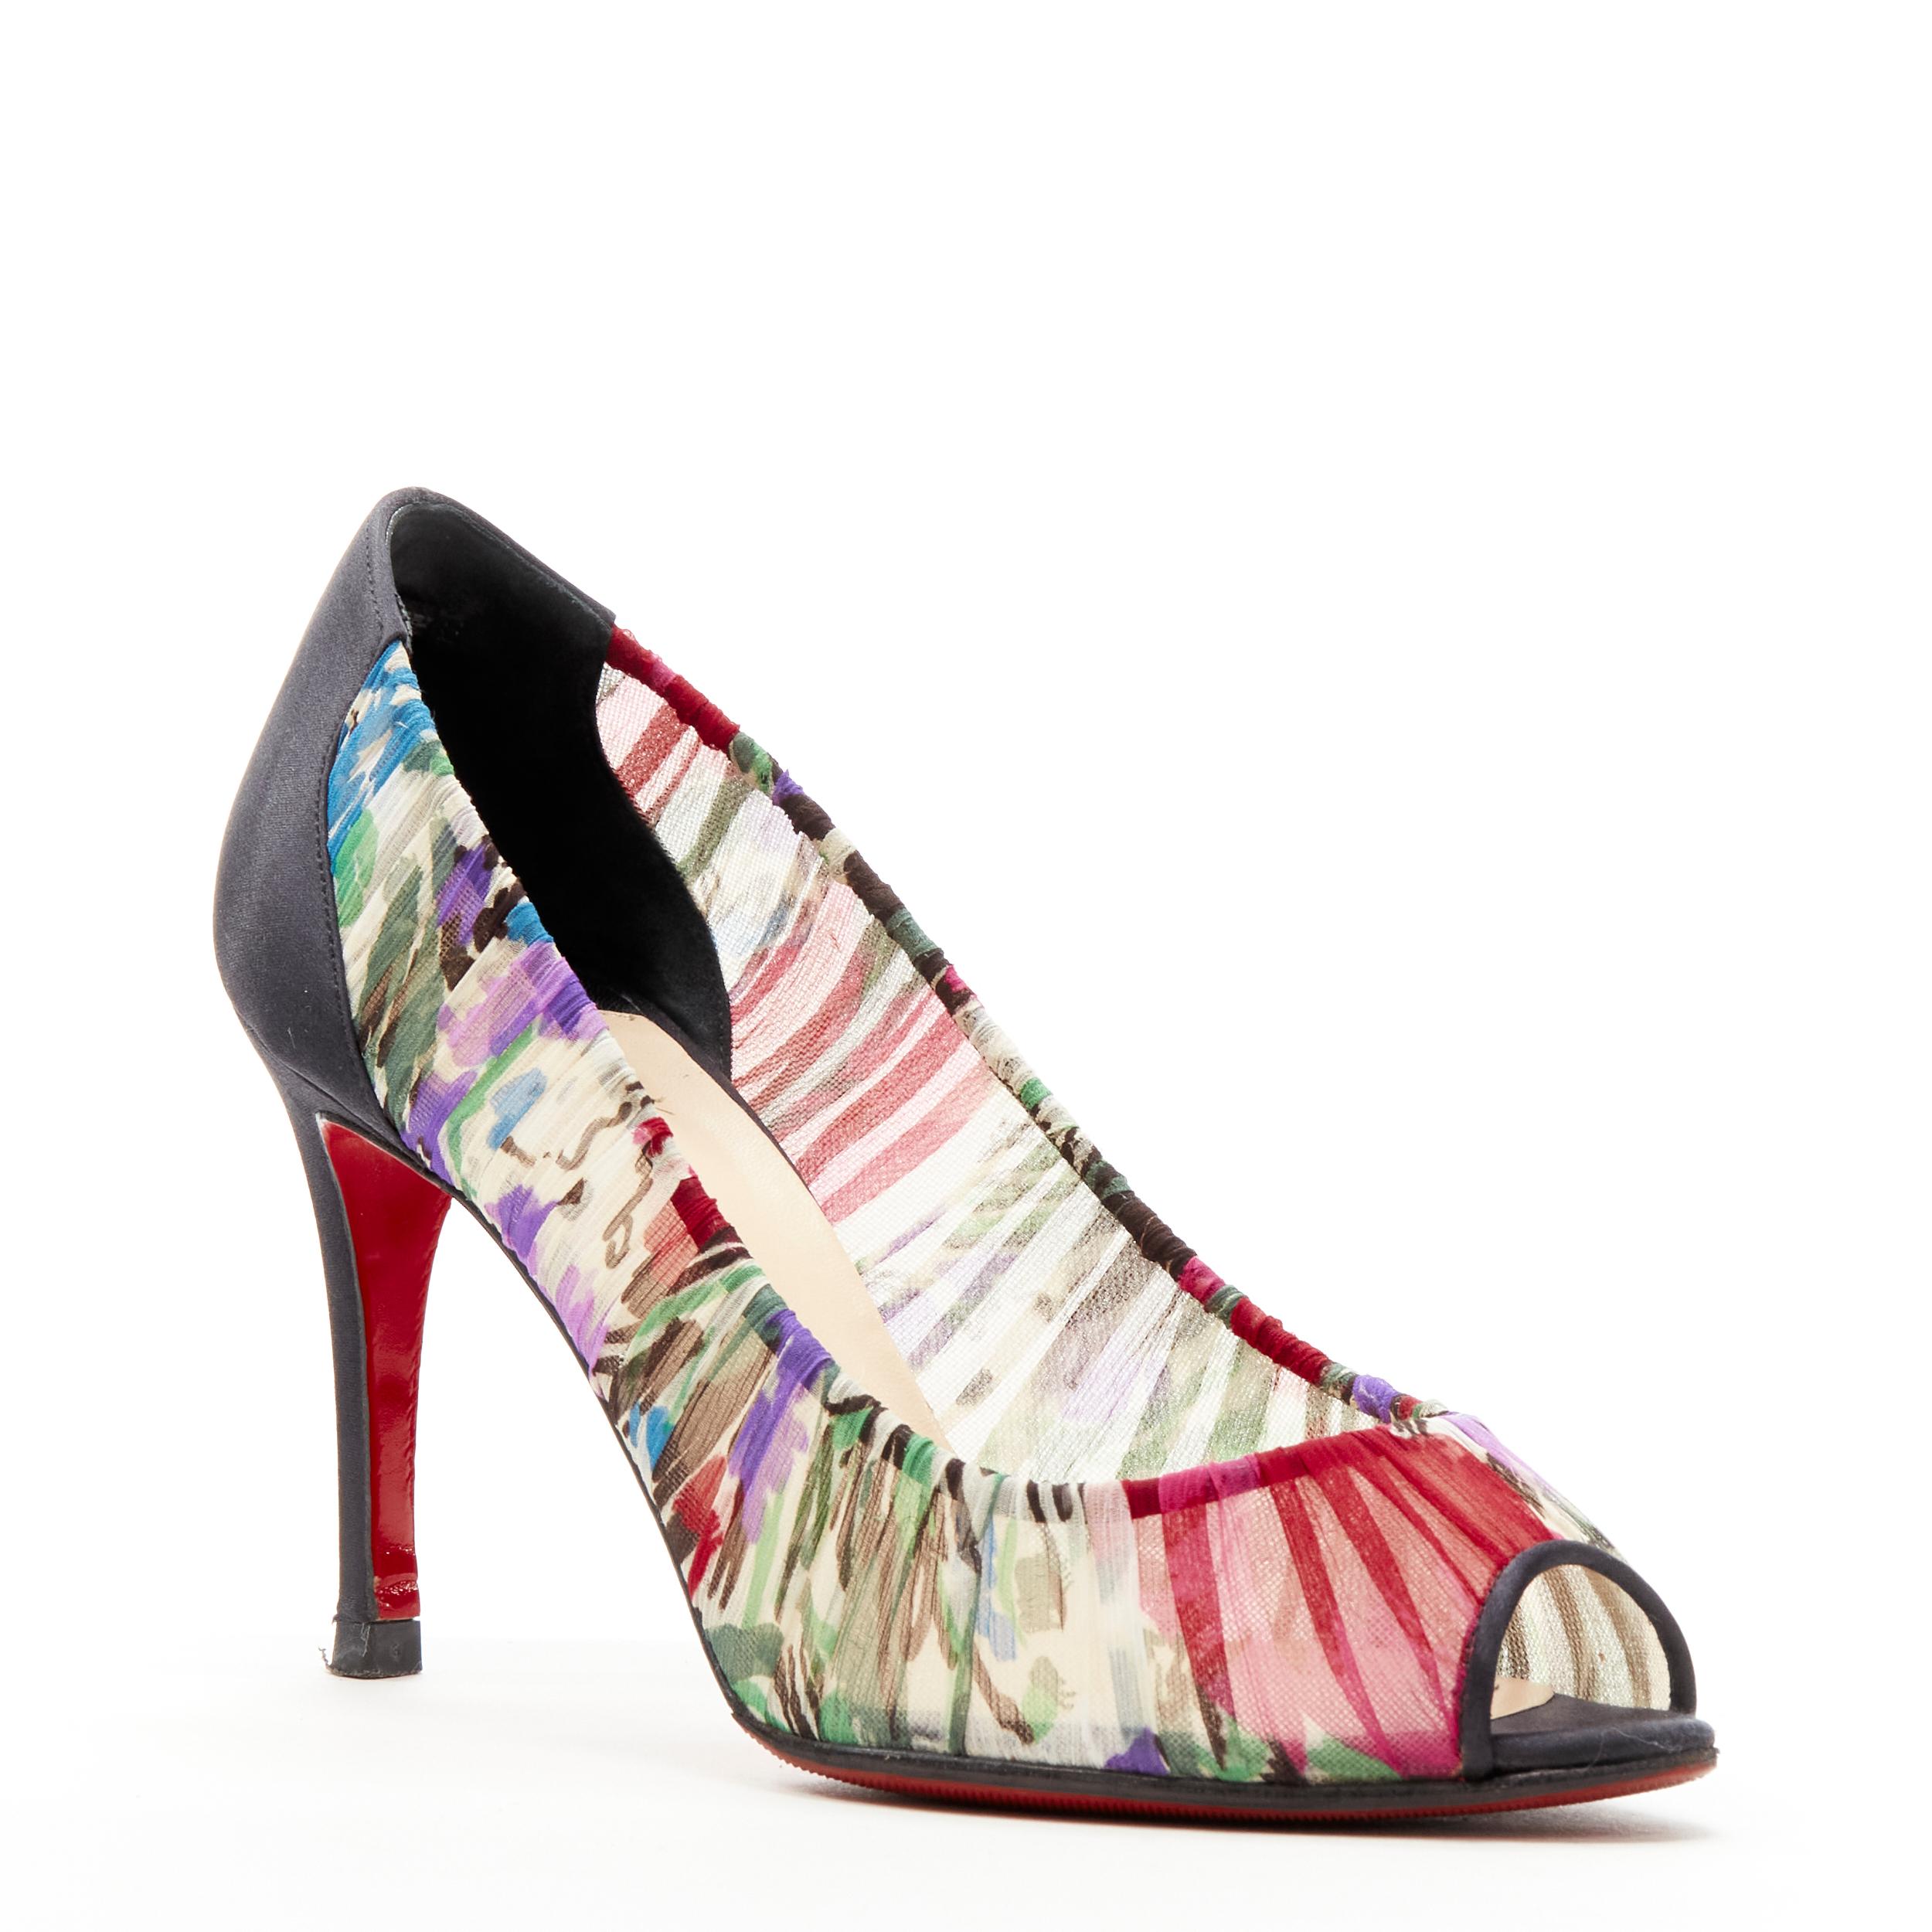 CHRISTIAN LOUBOUTIN black satin sheer floral peep toe heel EU37
Reference: ANWU/A00179 
Brand: Christian Louboutin 
Material: Fabric 
Color: Multicolour 
Pattern: Floral 
Made in: Italy 


CONDITION: 
Condition: Very good, this item was pre-owned